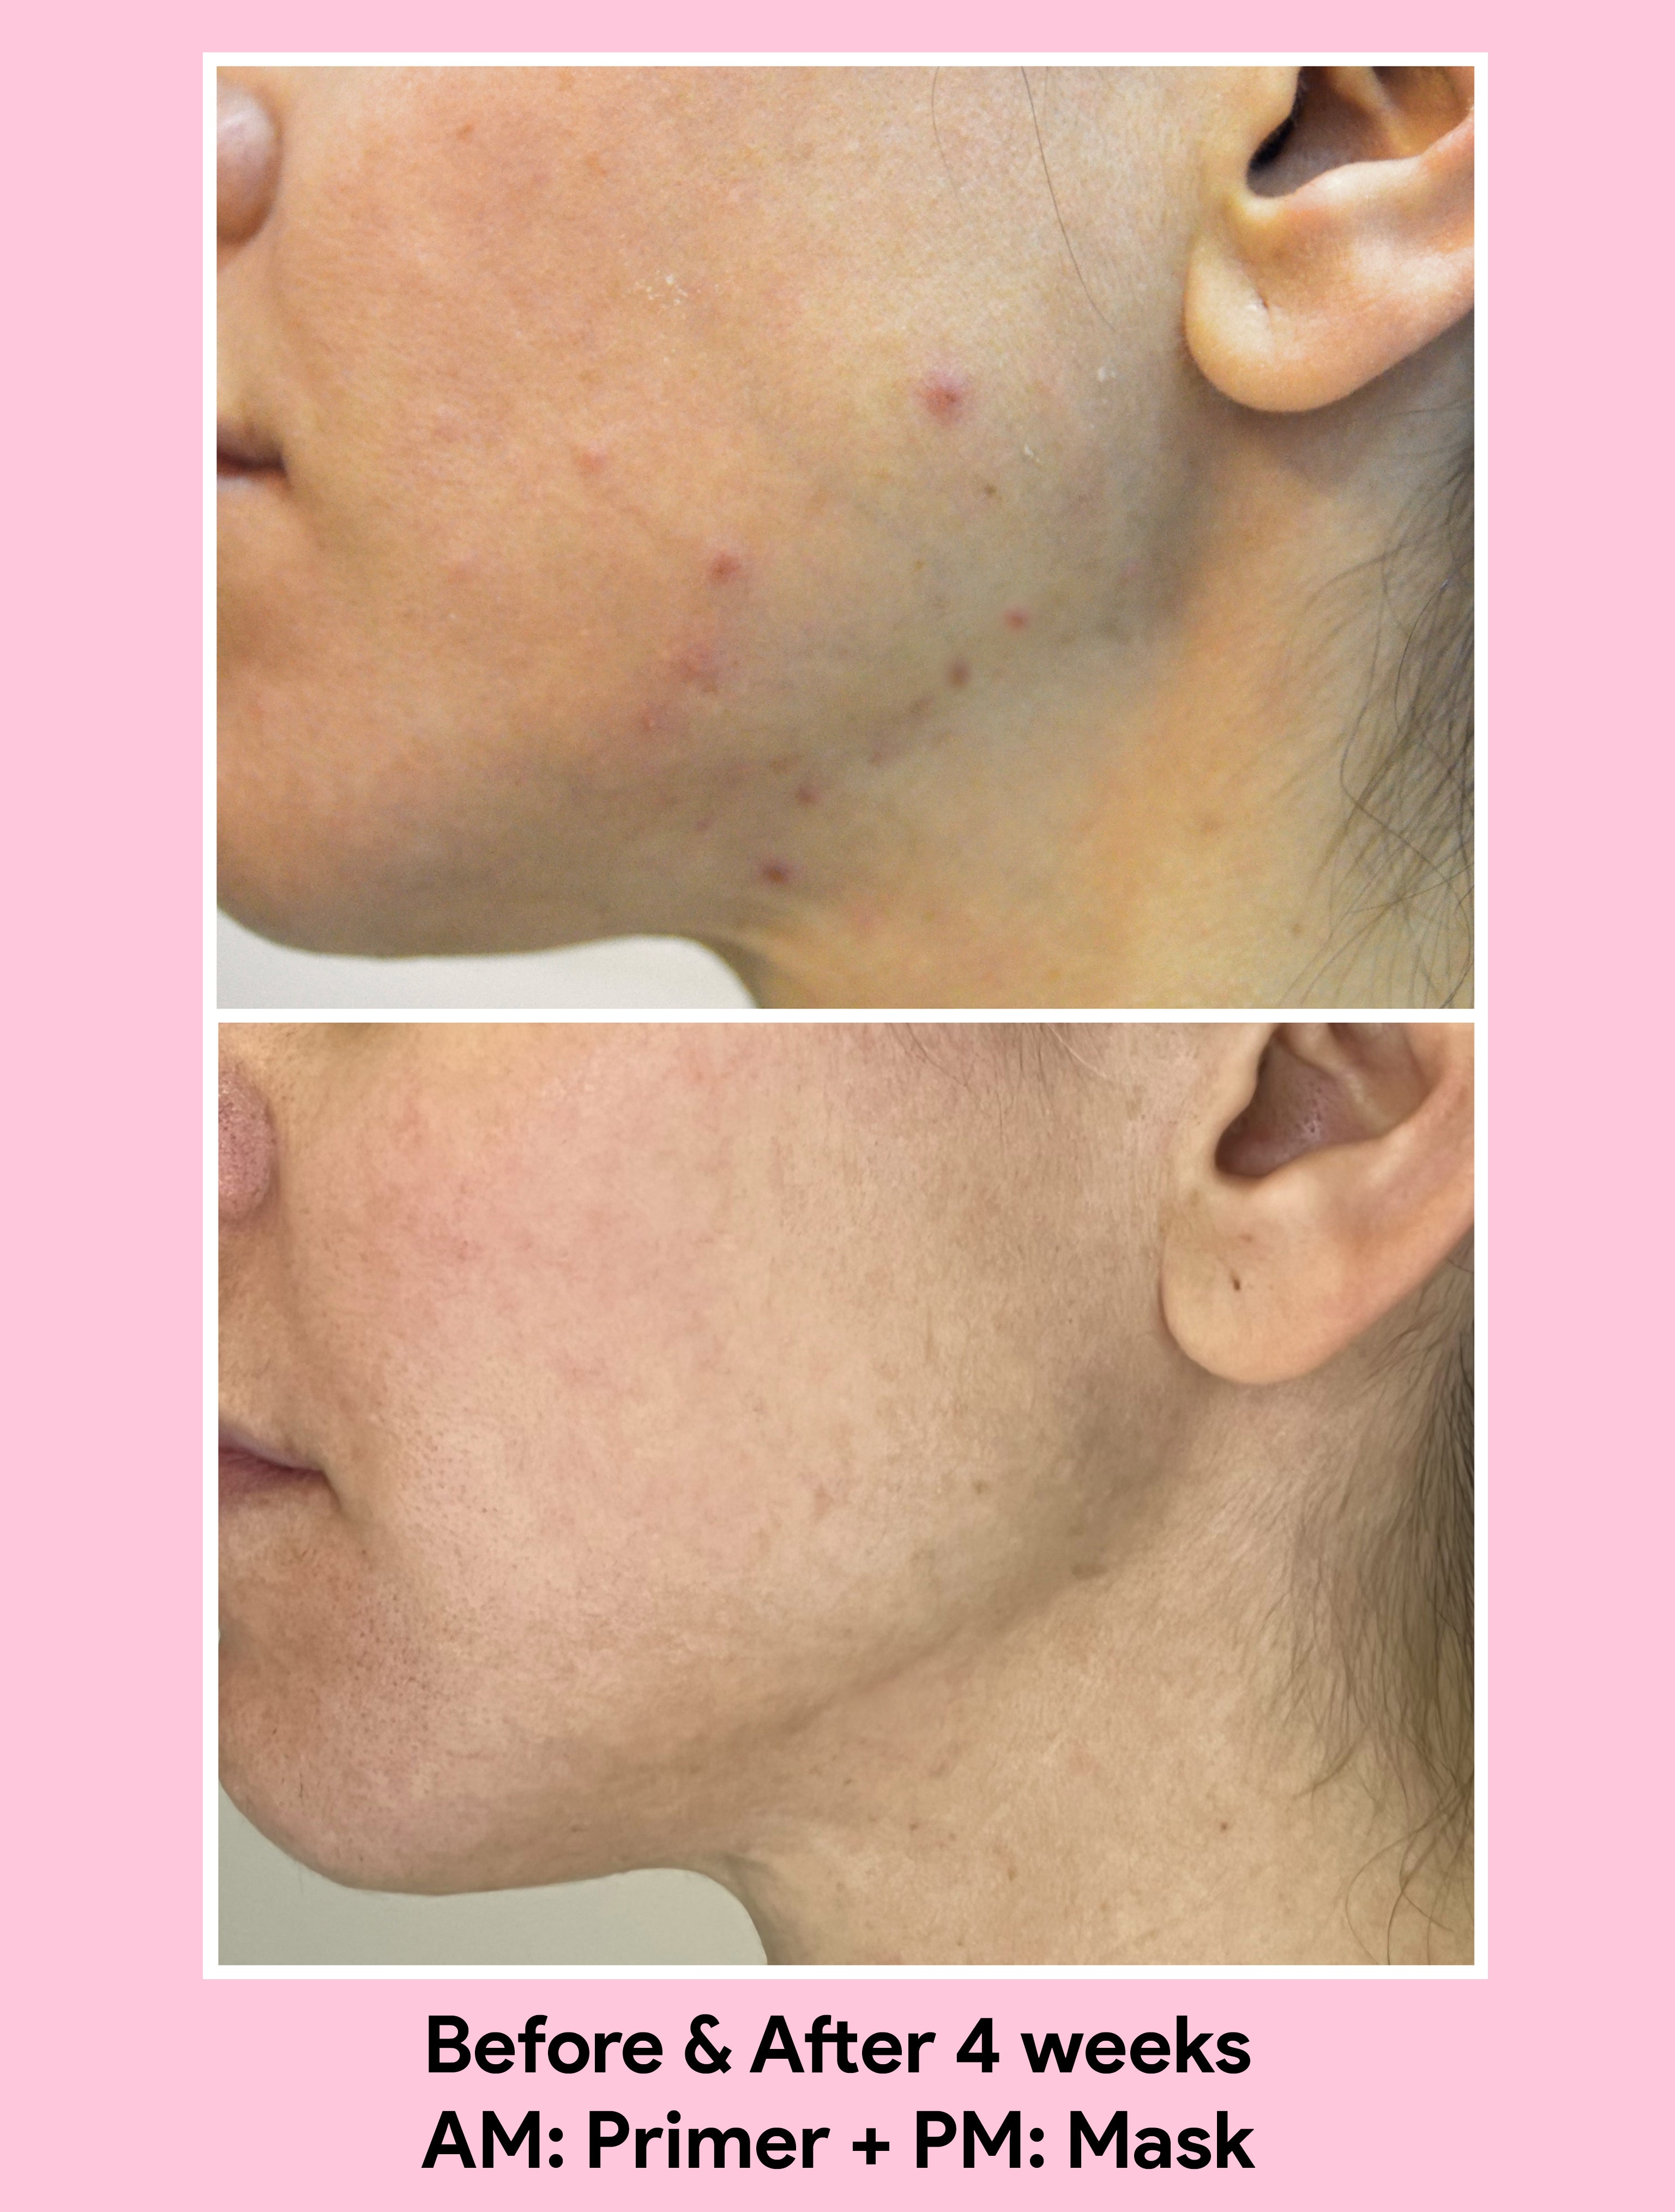 Before and After use of Jori Primer and Mask revealing clear skin after 4 weeks.